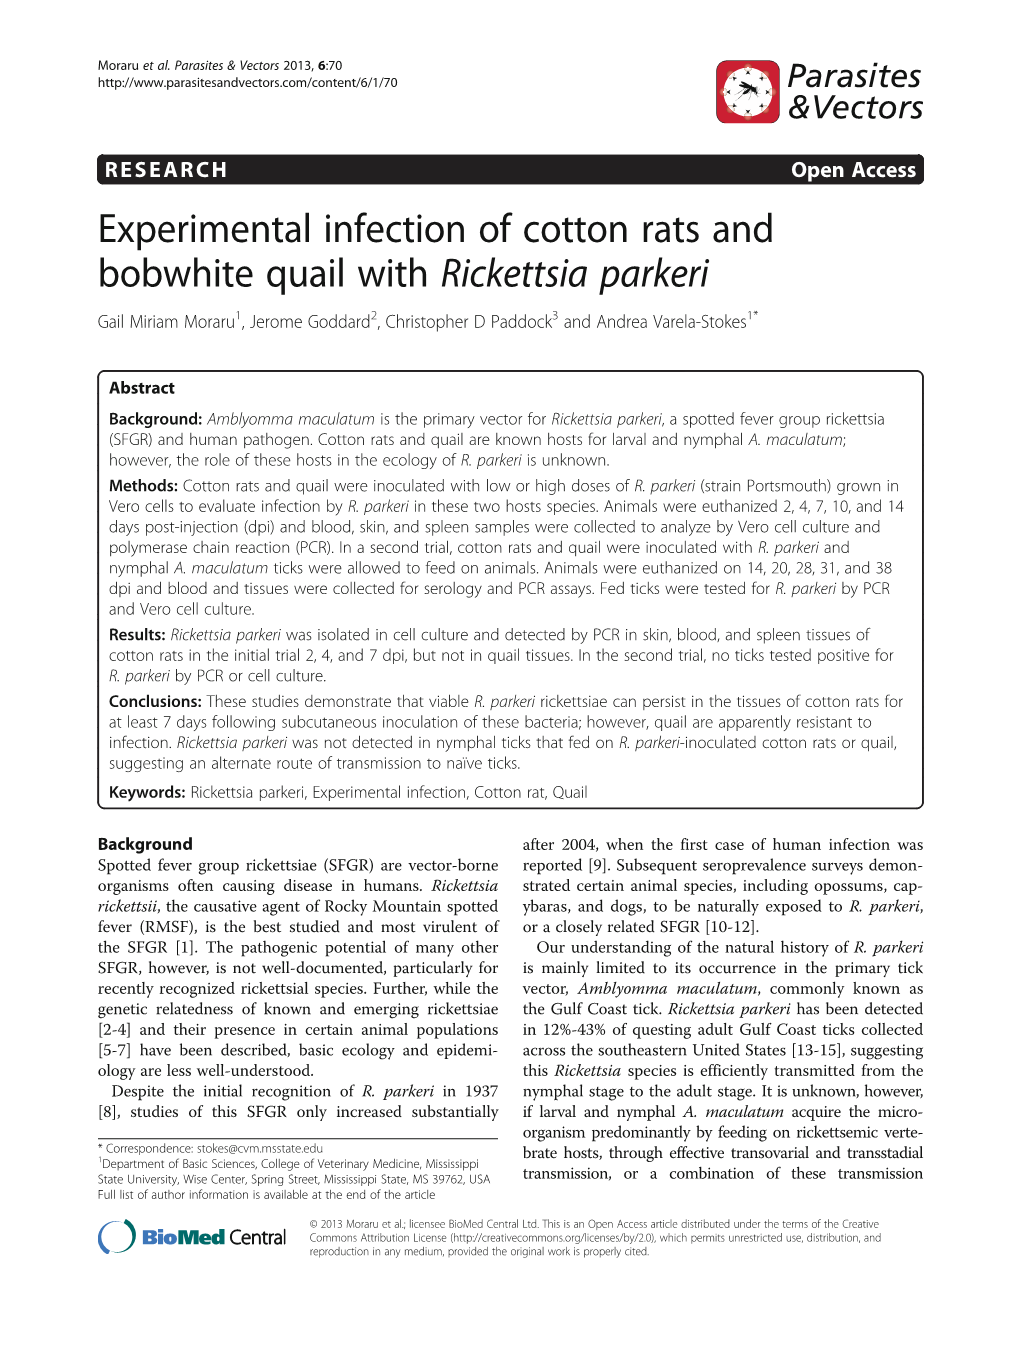 Experimental Infection of Cotton Rats and Bobwhite Quail with Rickettsia